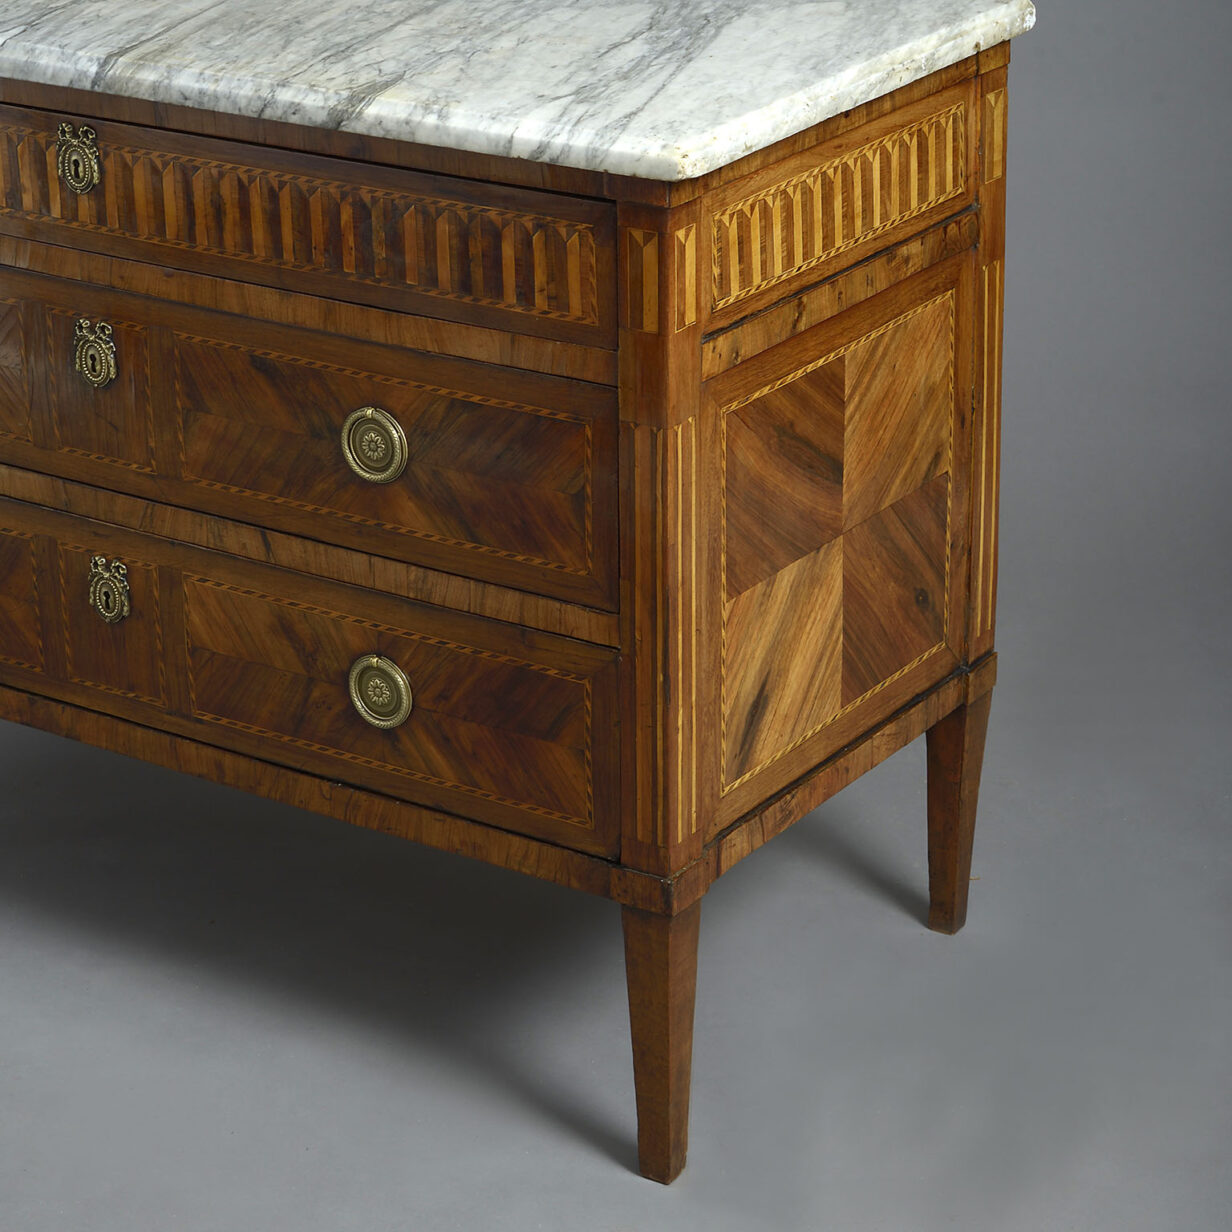 Late 18th century walnut parquetry commode